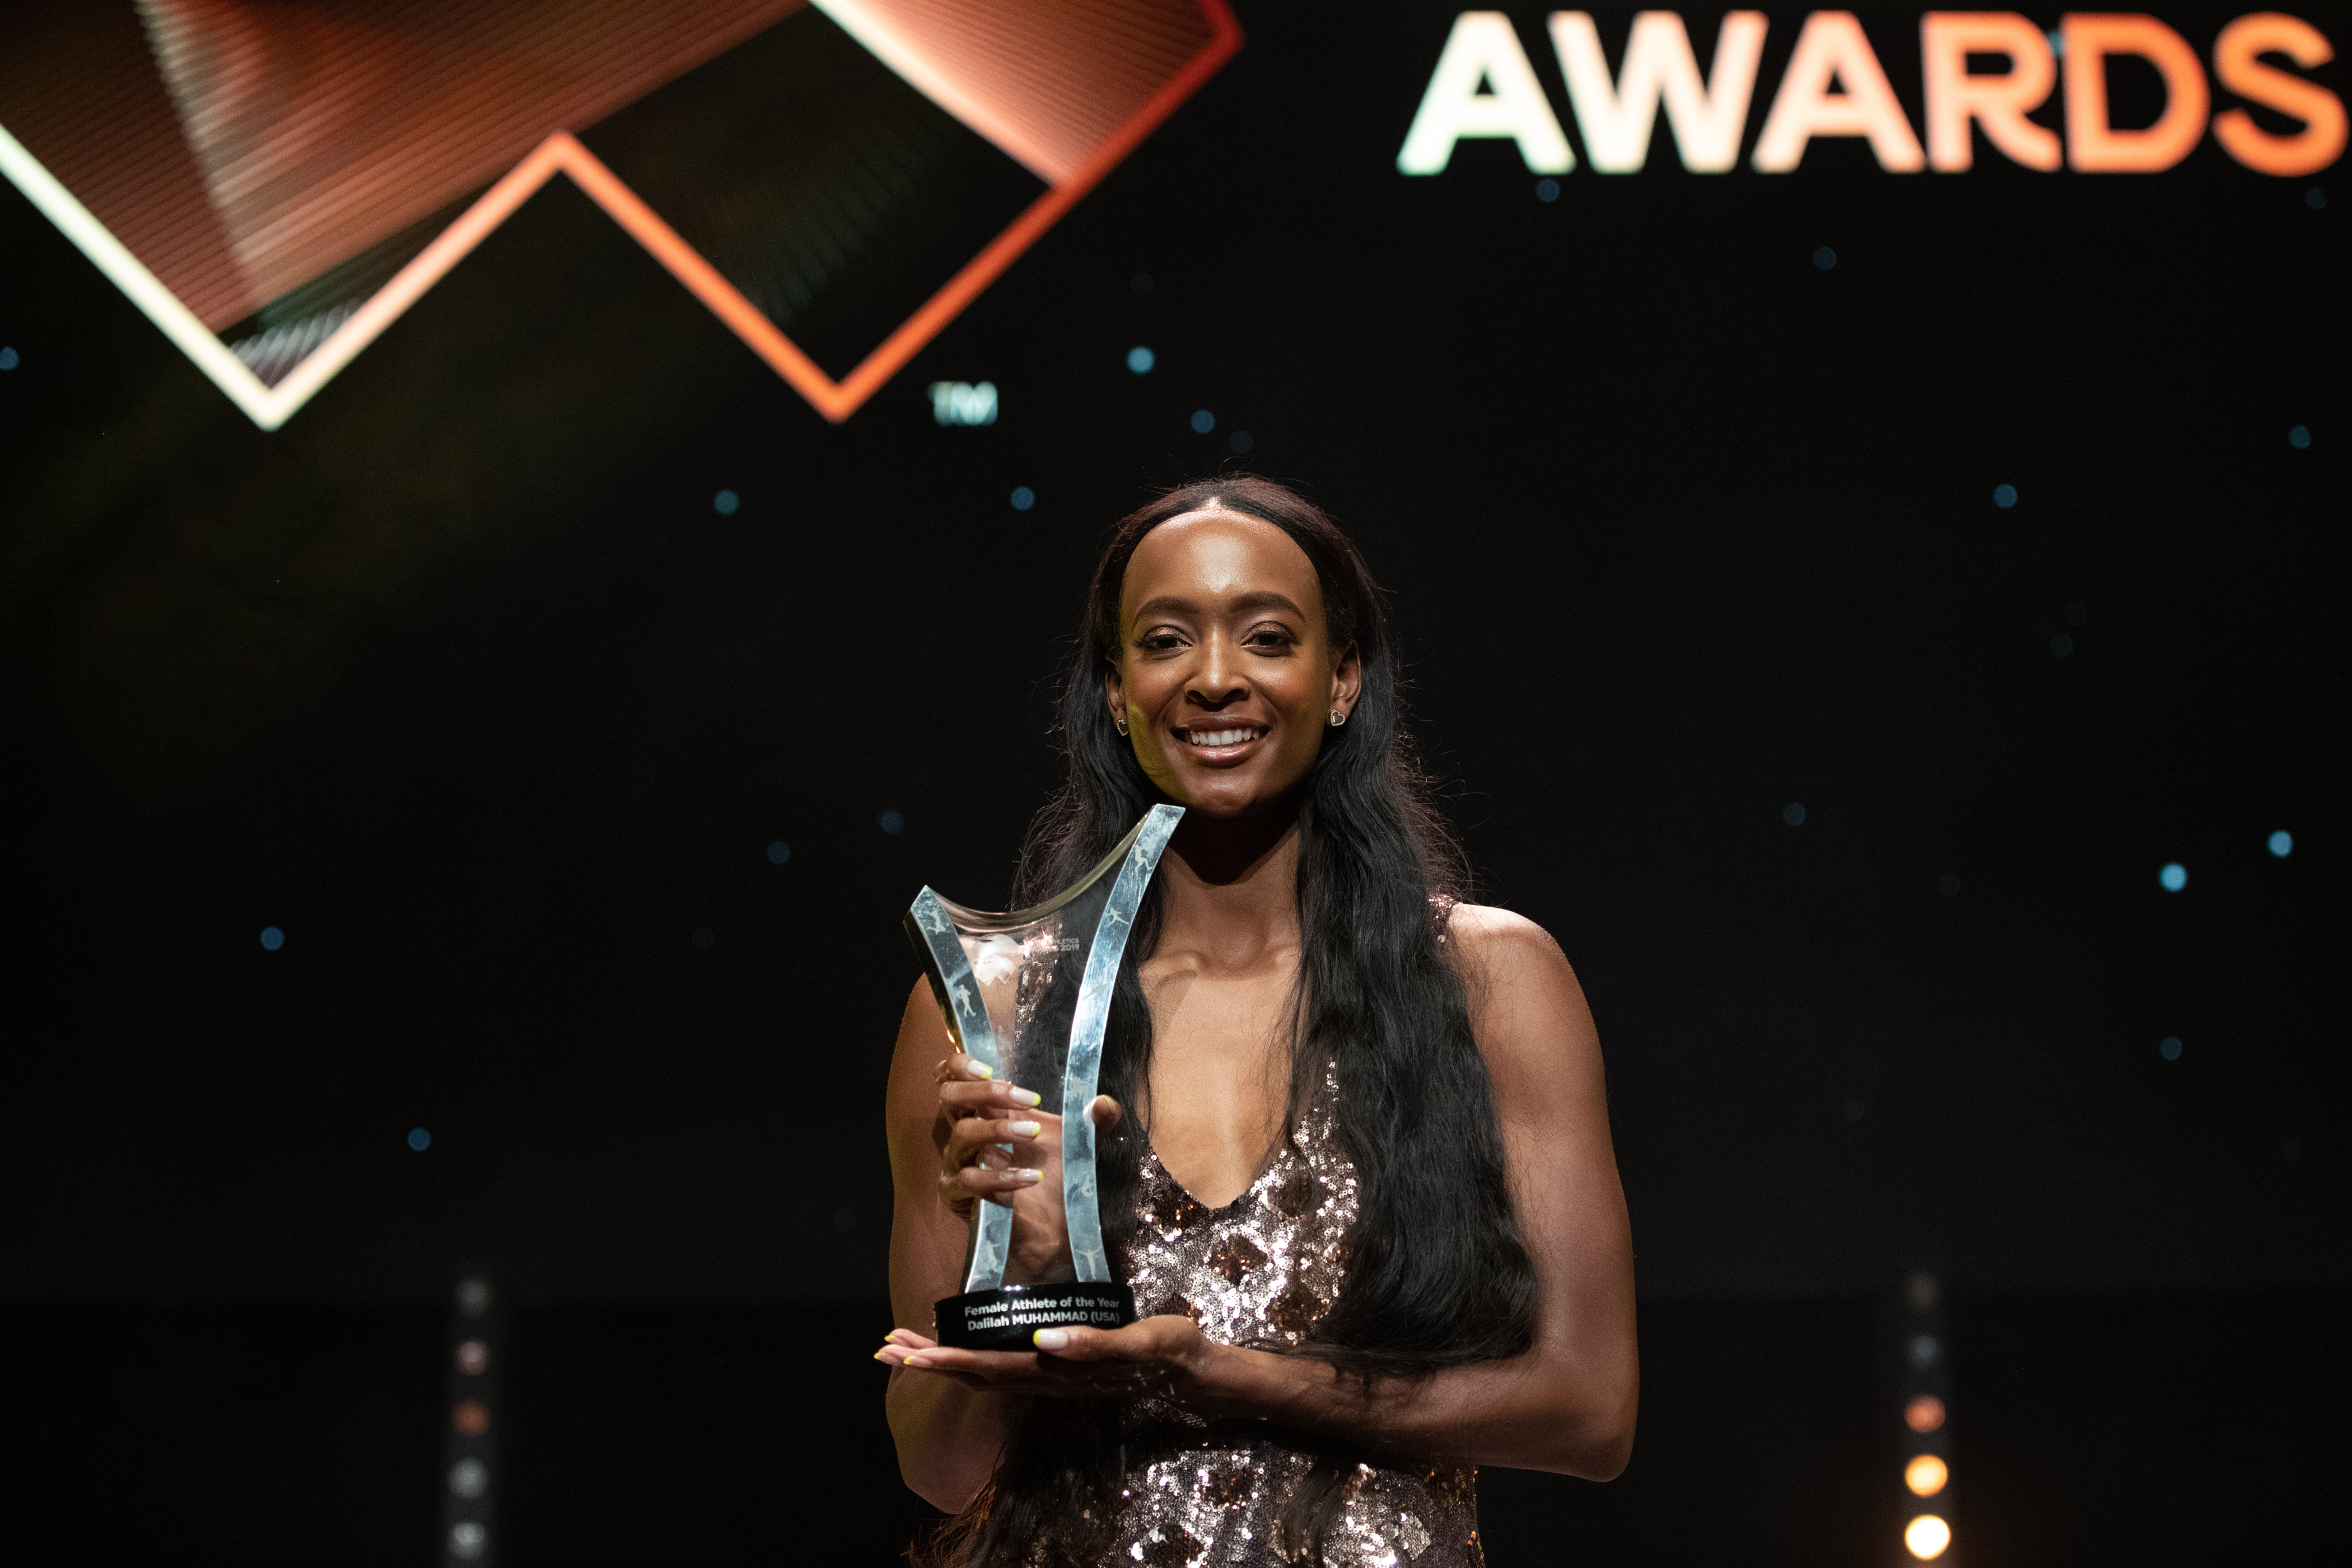 Fraser-Pryce misses out; Mohammed, Kipchoge win AOY Awards